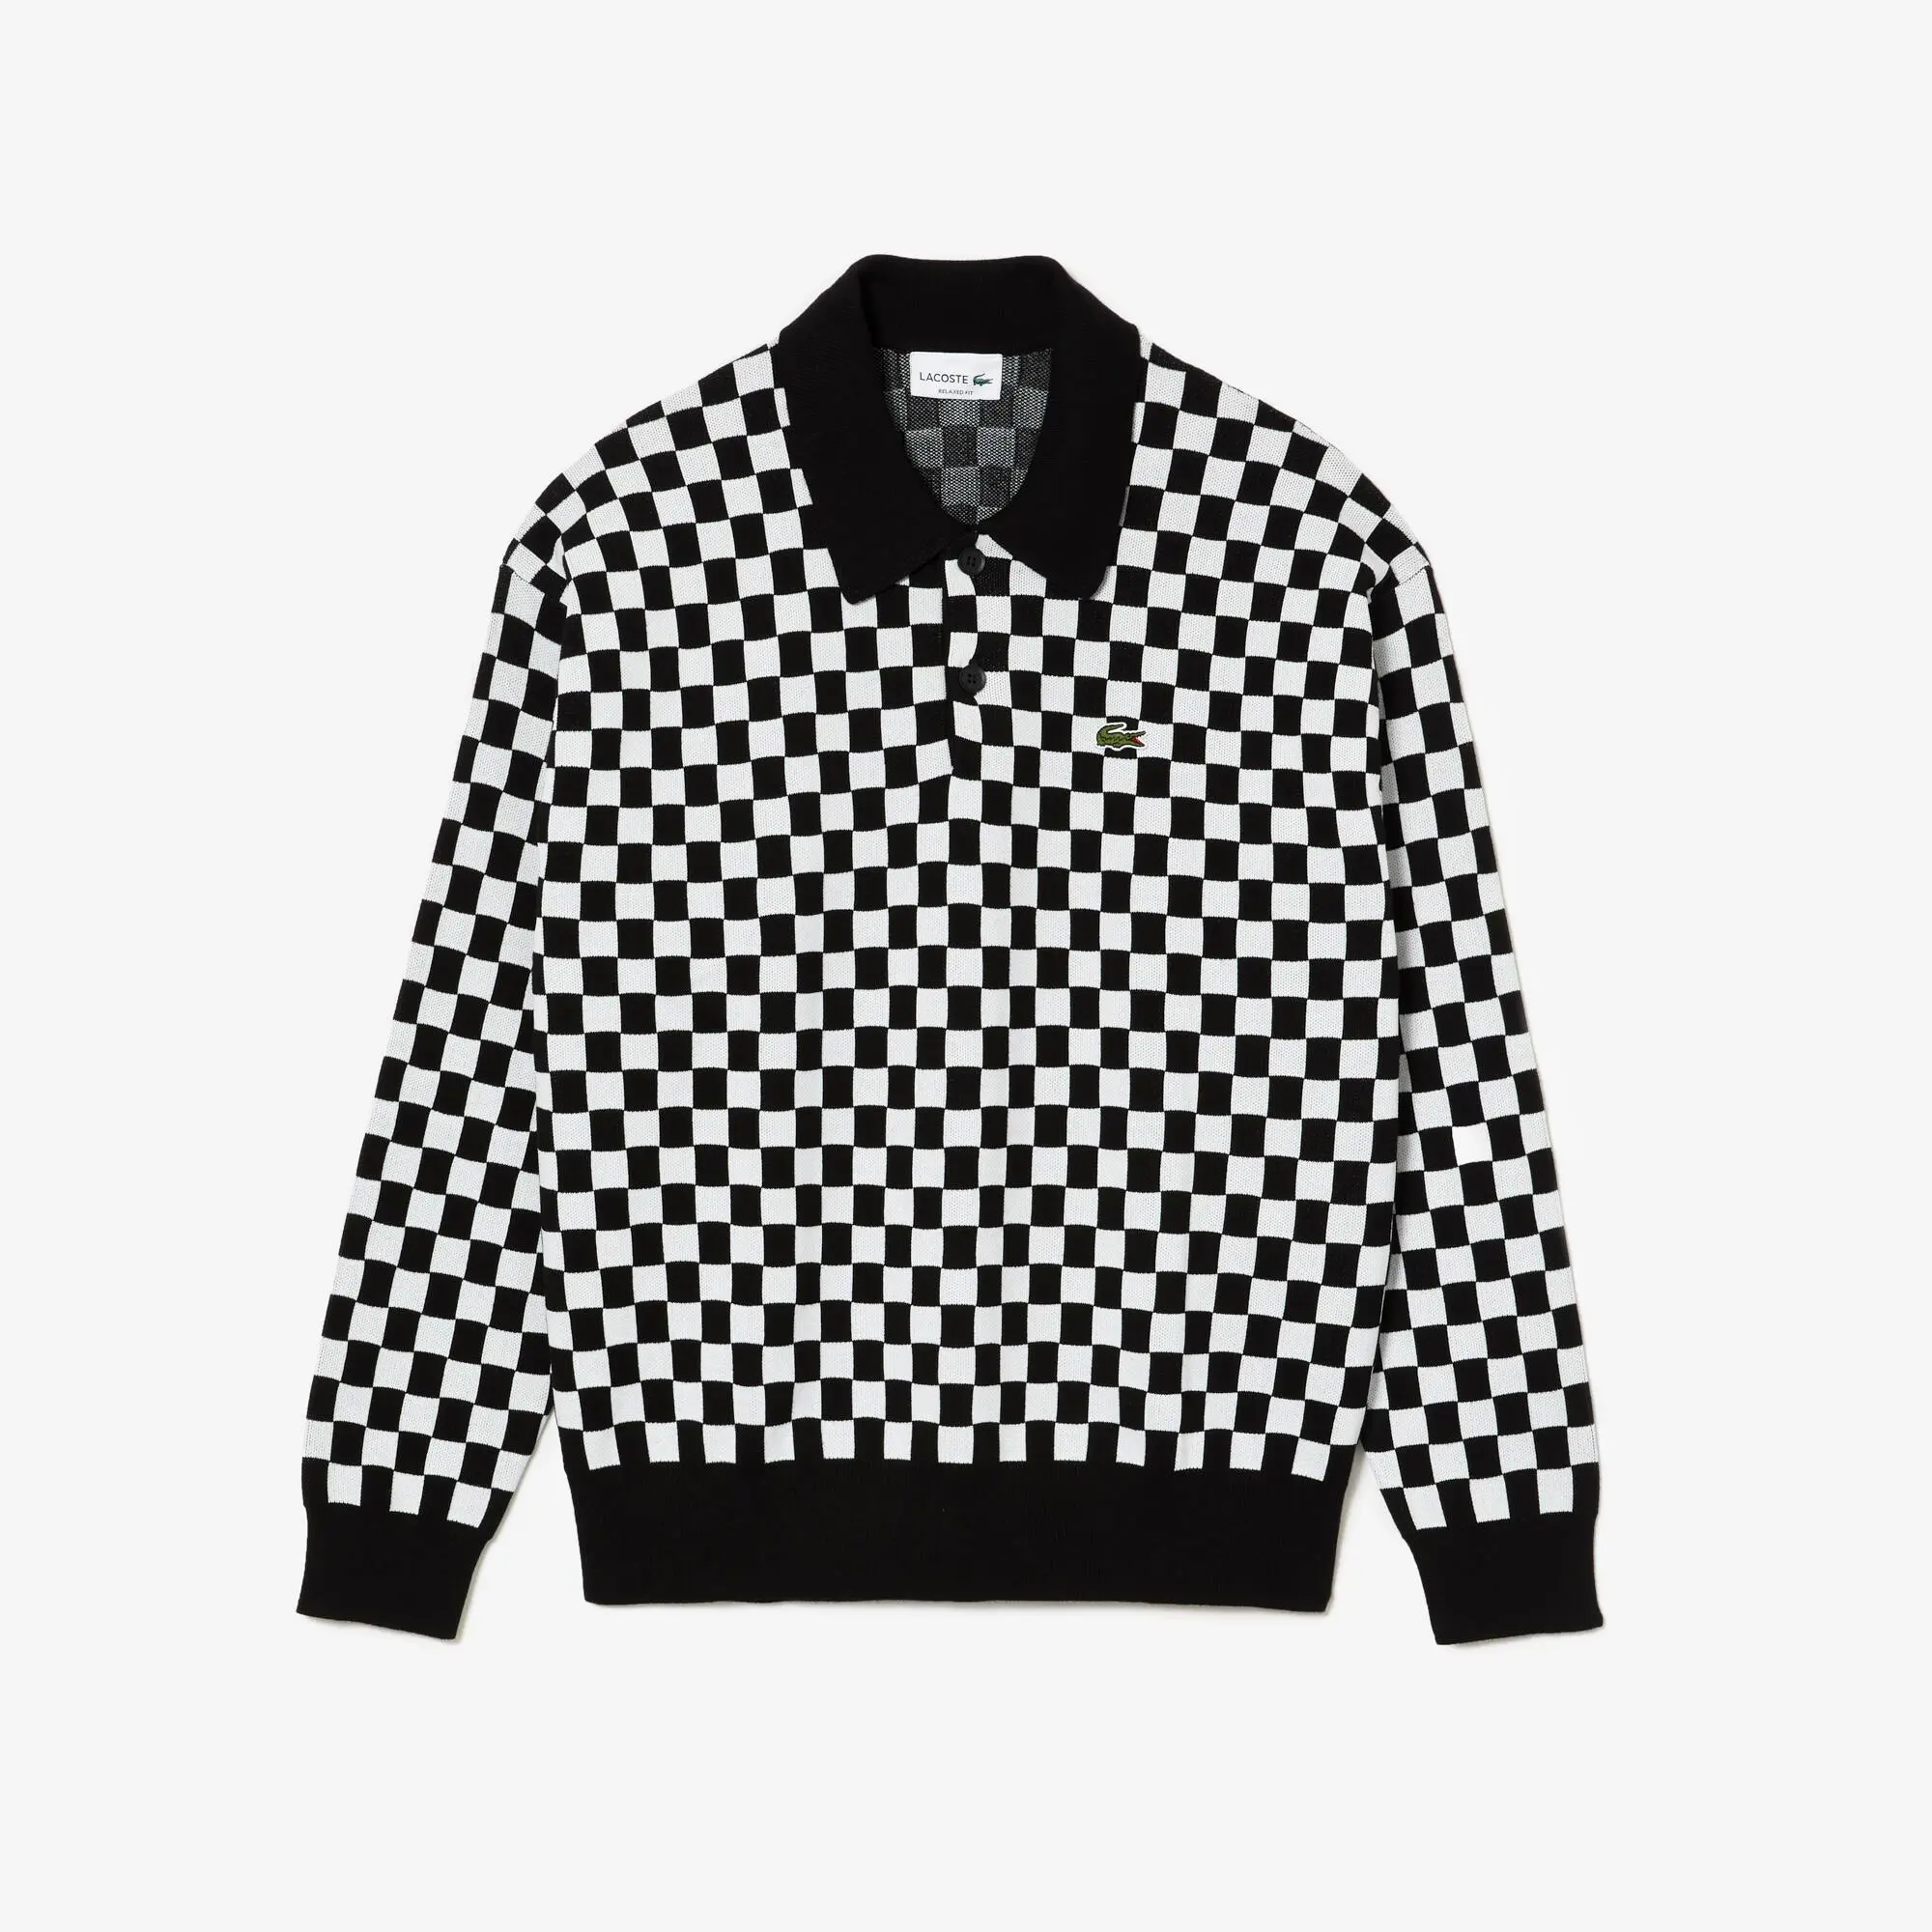 Lacoste Men's Lacoste Héritage Relaxed Fit Checkerboard Print Sweater. 2